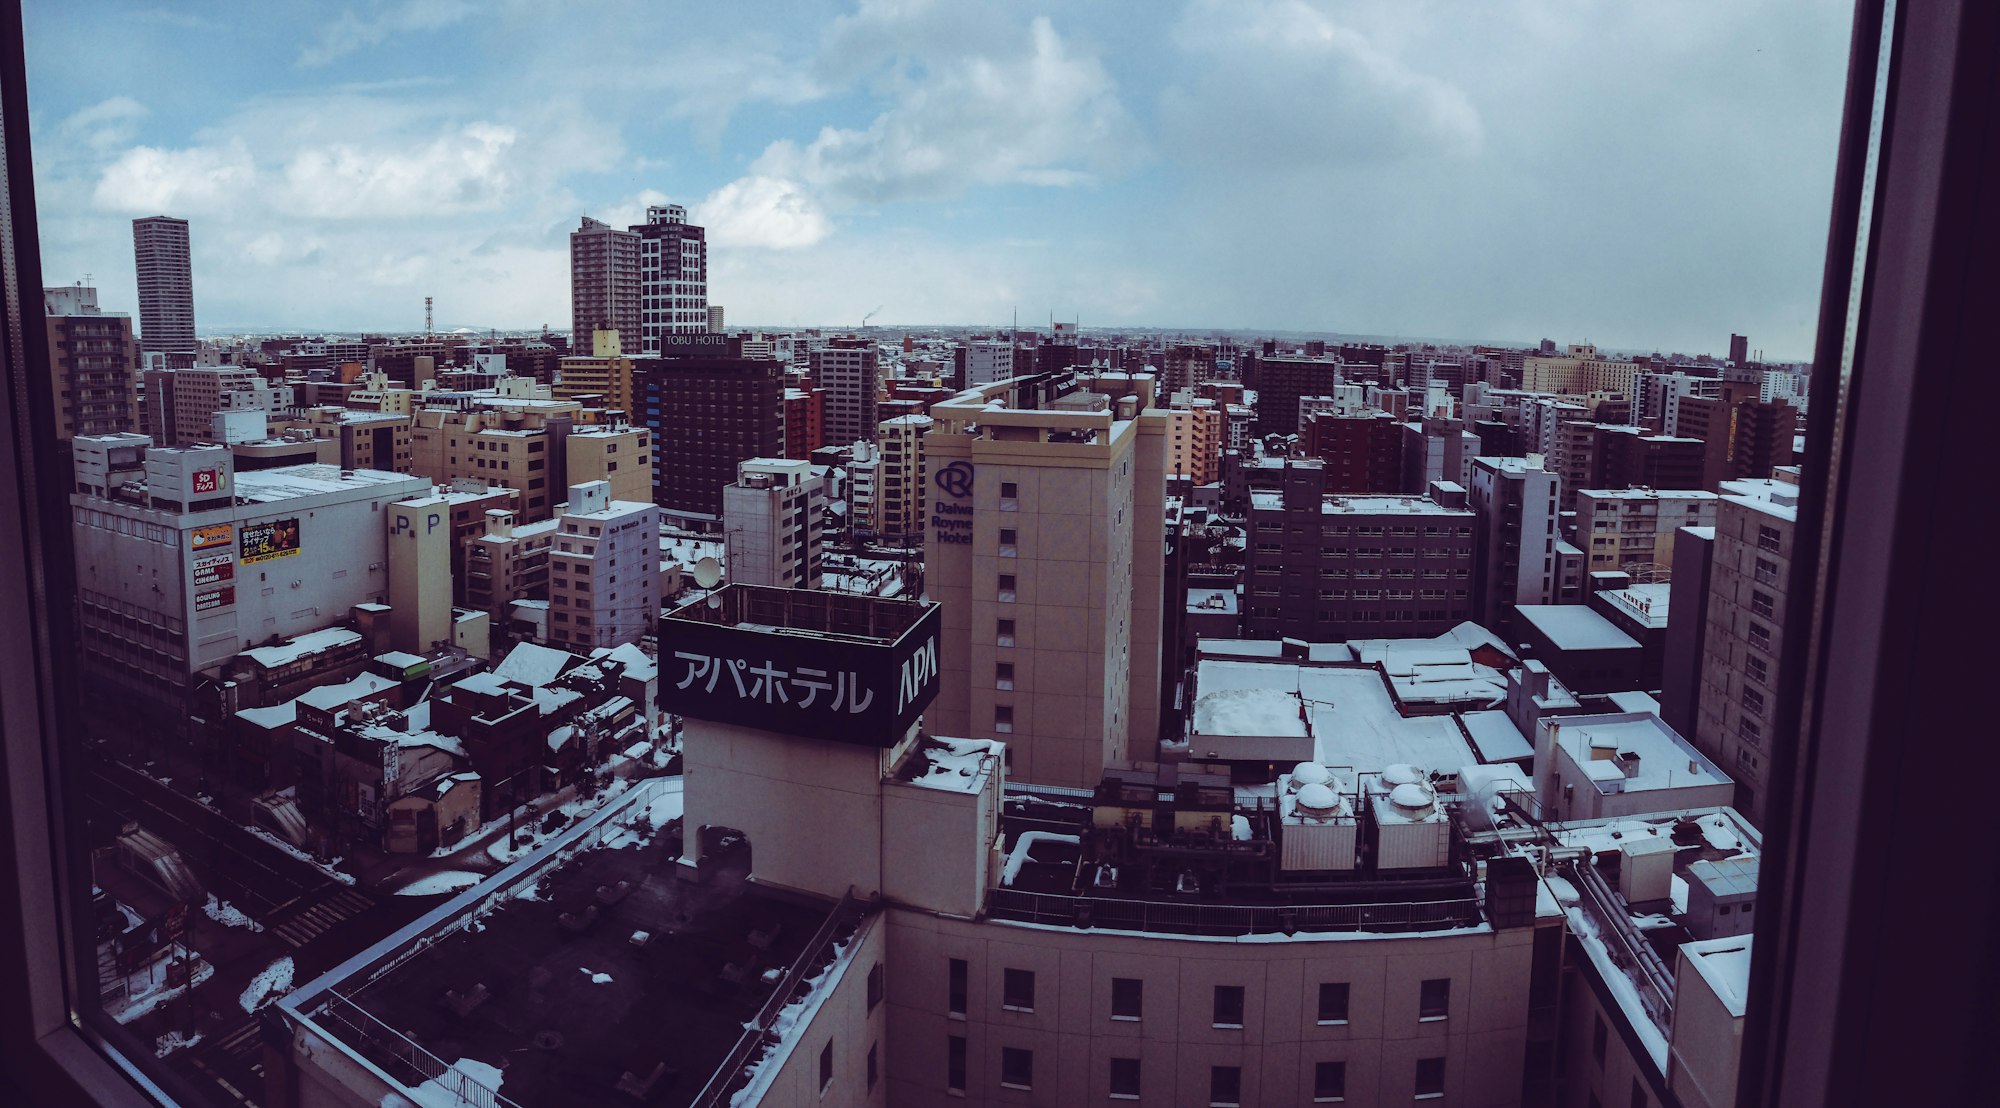 View of Sapporo, Hokkaido Japan from the window of our hotel